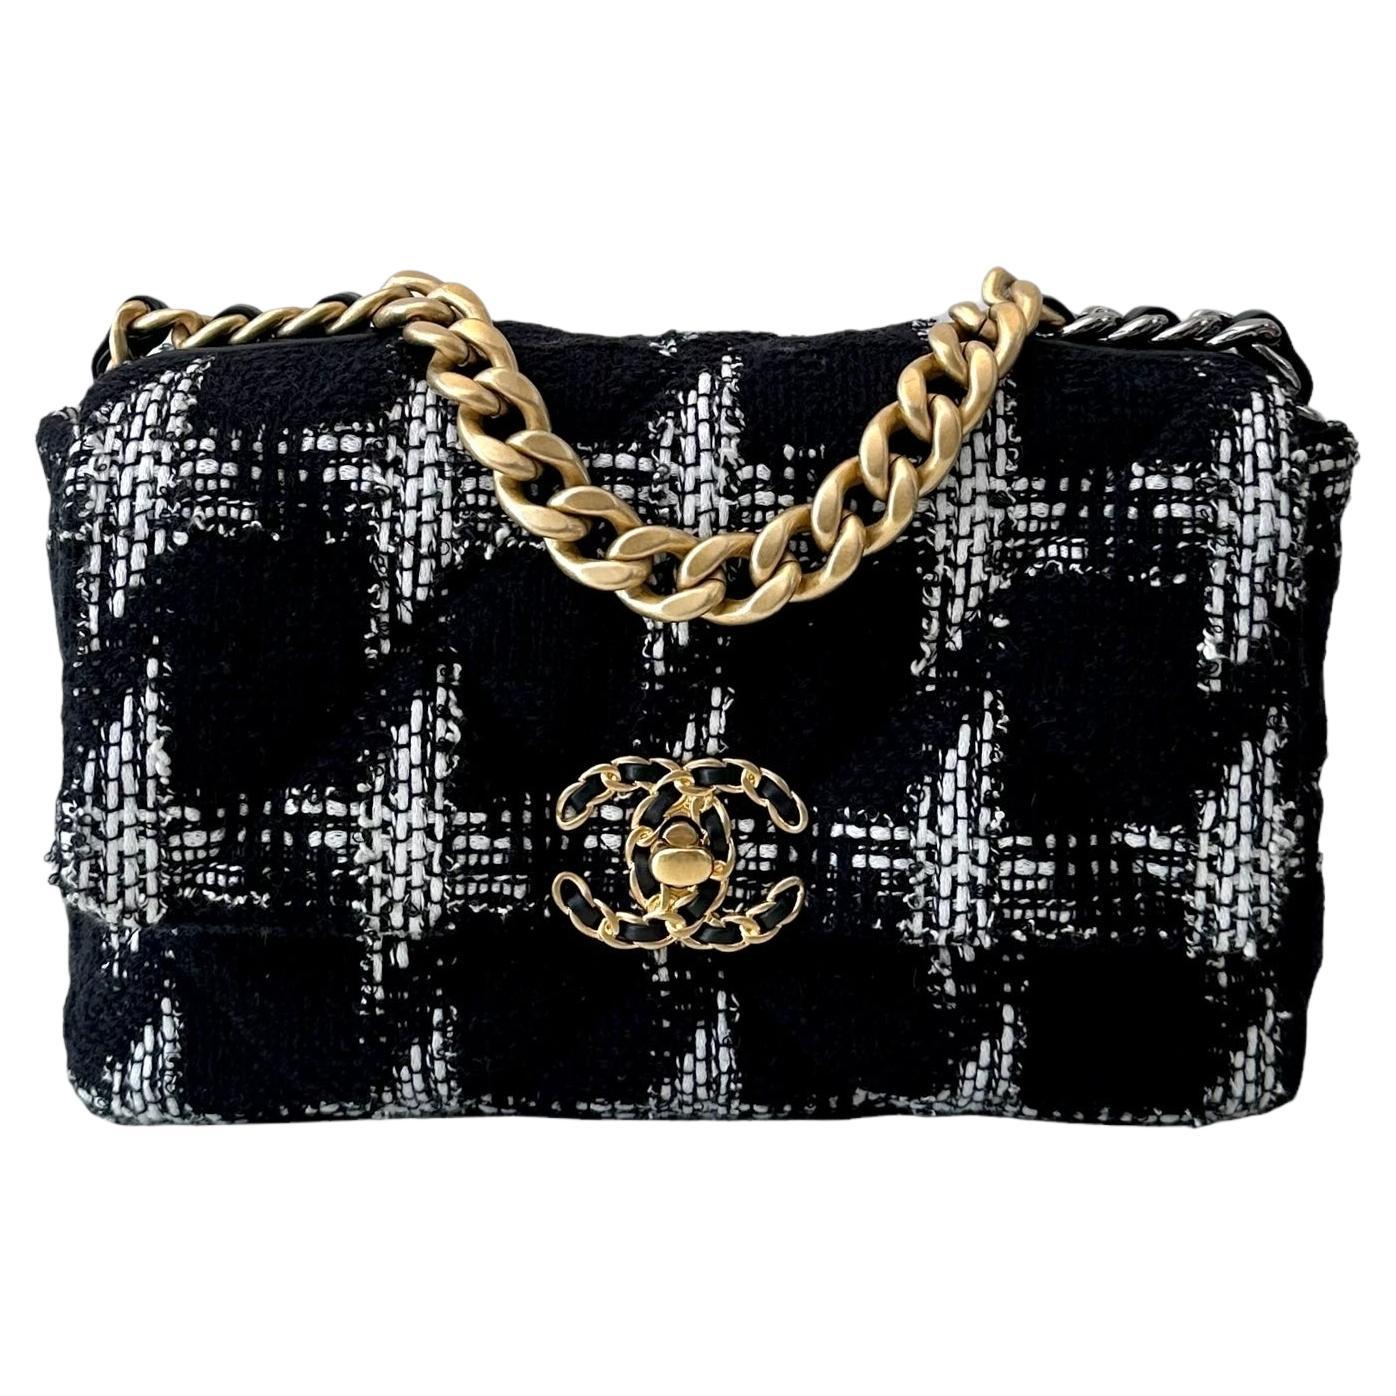 Can you wear Chanel 19 as a shoulder bag?